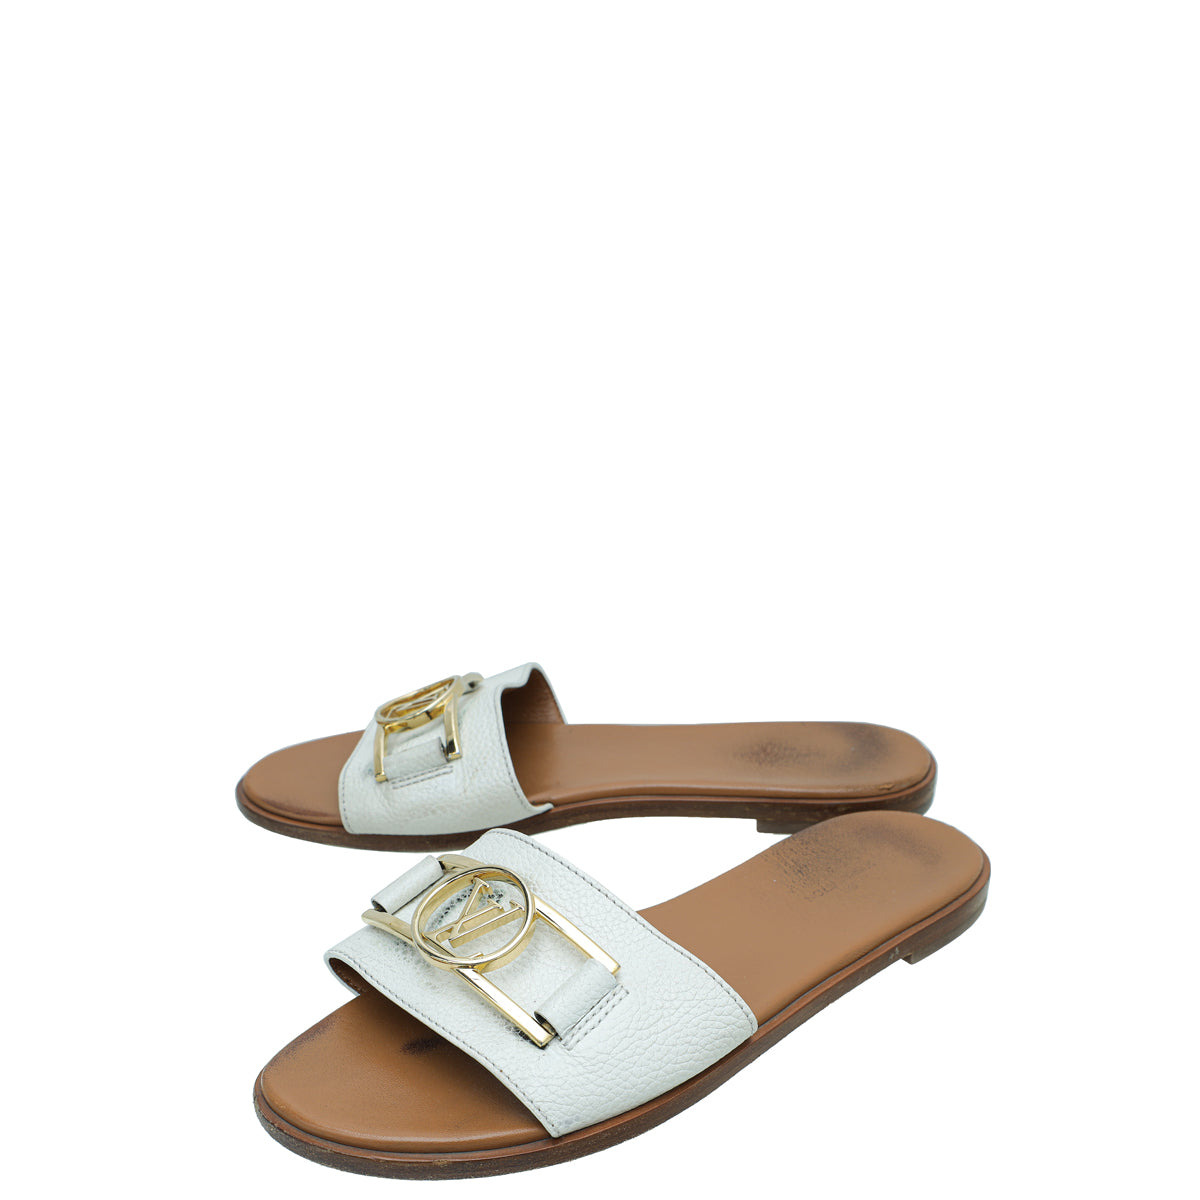 Louis Vuitton Sandals *WATCH THIS BEFORE BUYING* - (Lock It Flat